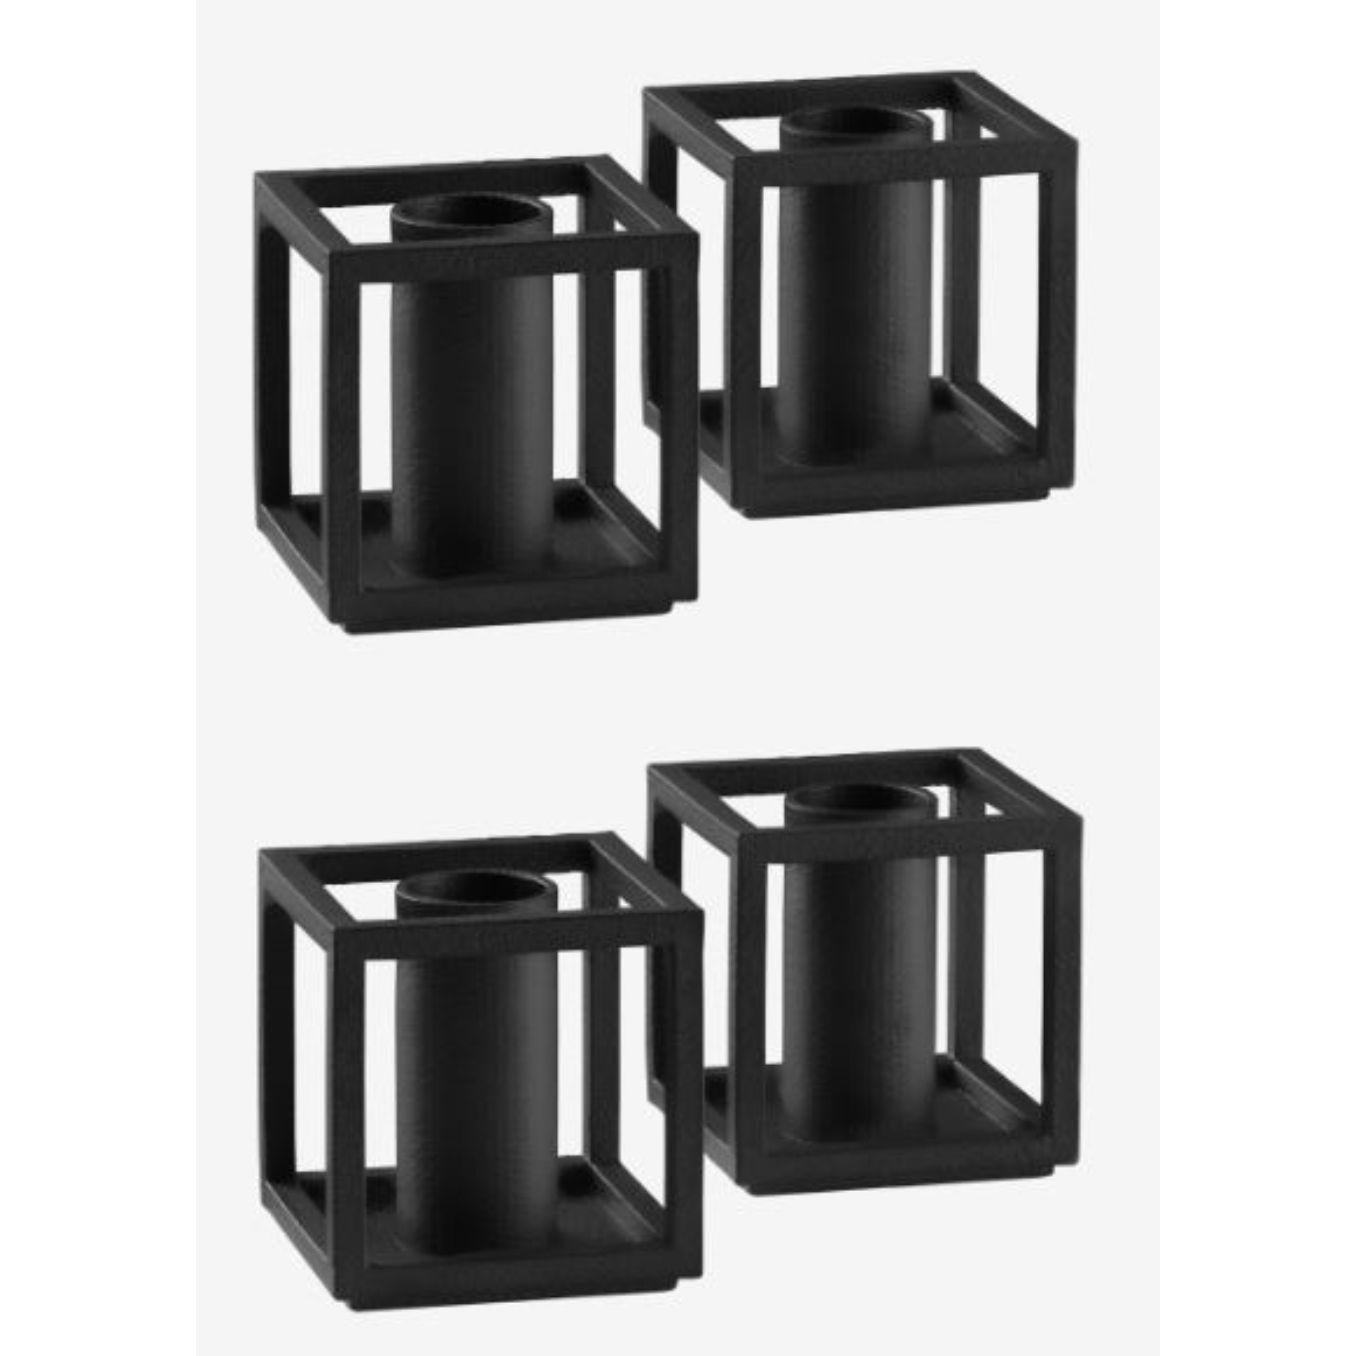 Set of 4 black Kubus micro candle holders by Lassen
Dimensions: D 3.50 x W 3.50 x H 3.65 cm 
Materials: Metal 
Also available in different dimensions.
Weight: 0.15 Kg

A new small wonder has seen the light of day. Kubus Micro is a stylish,